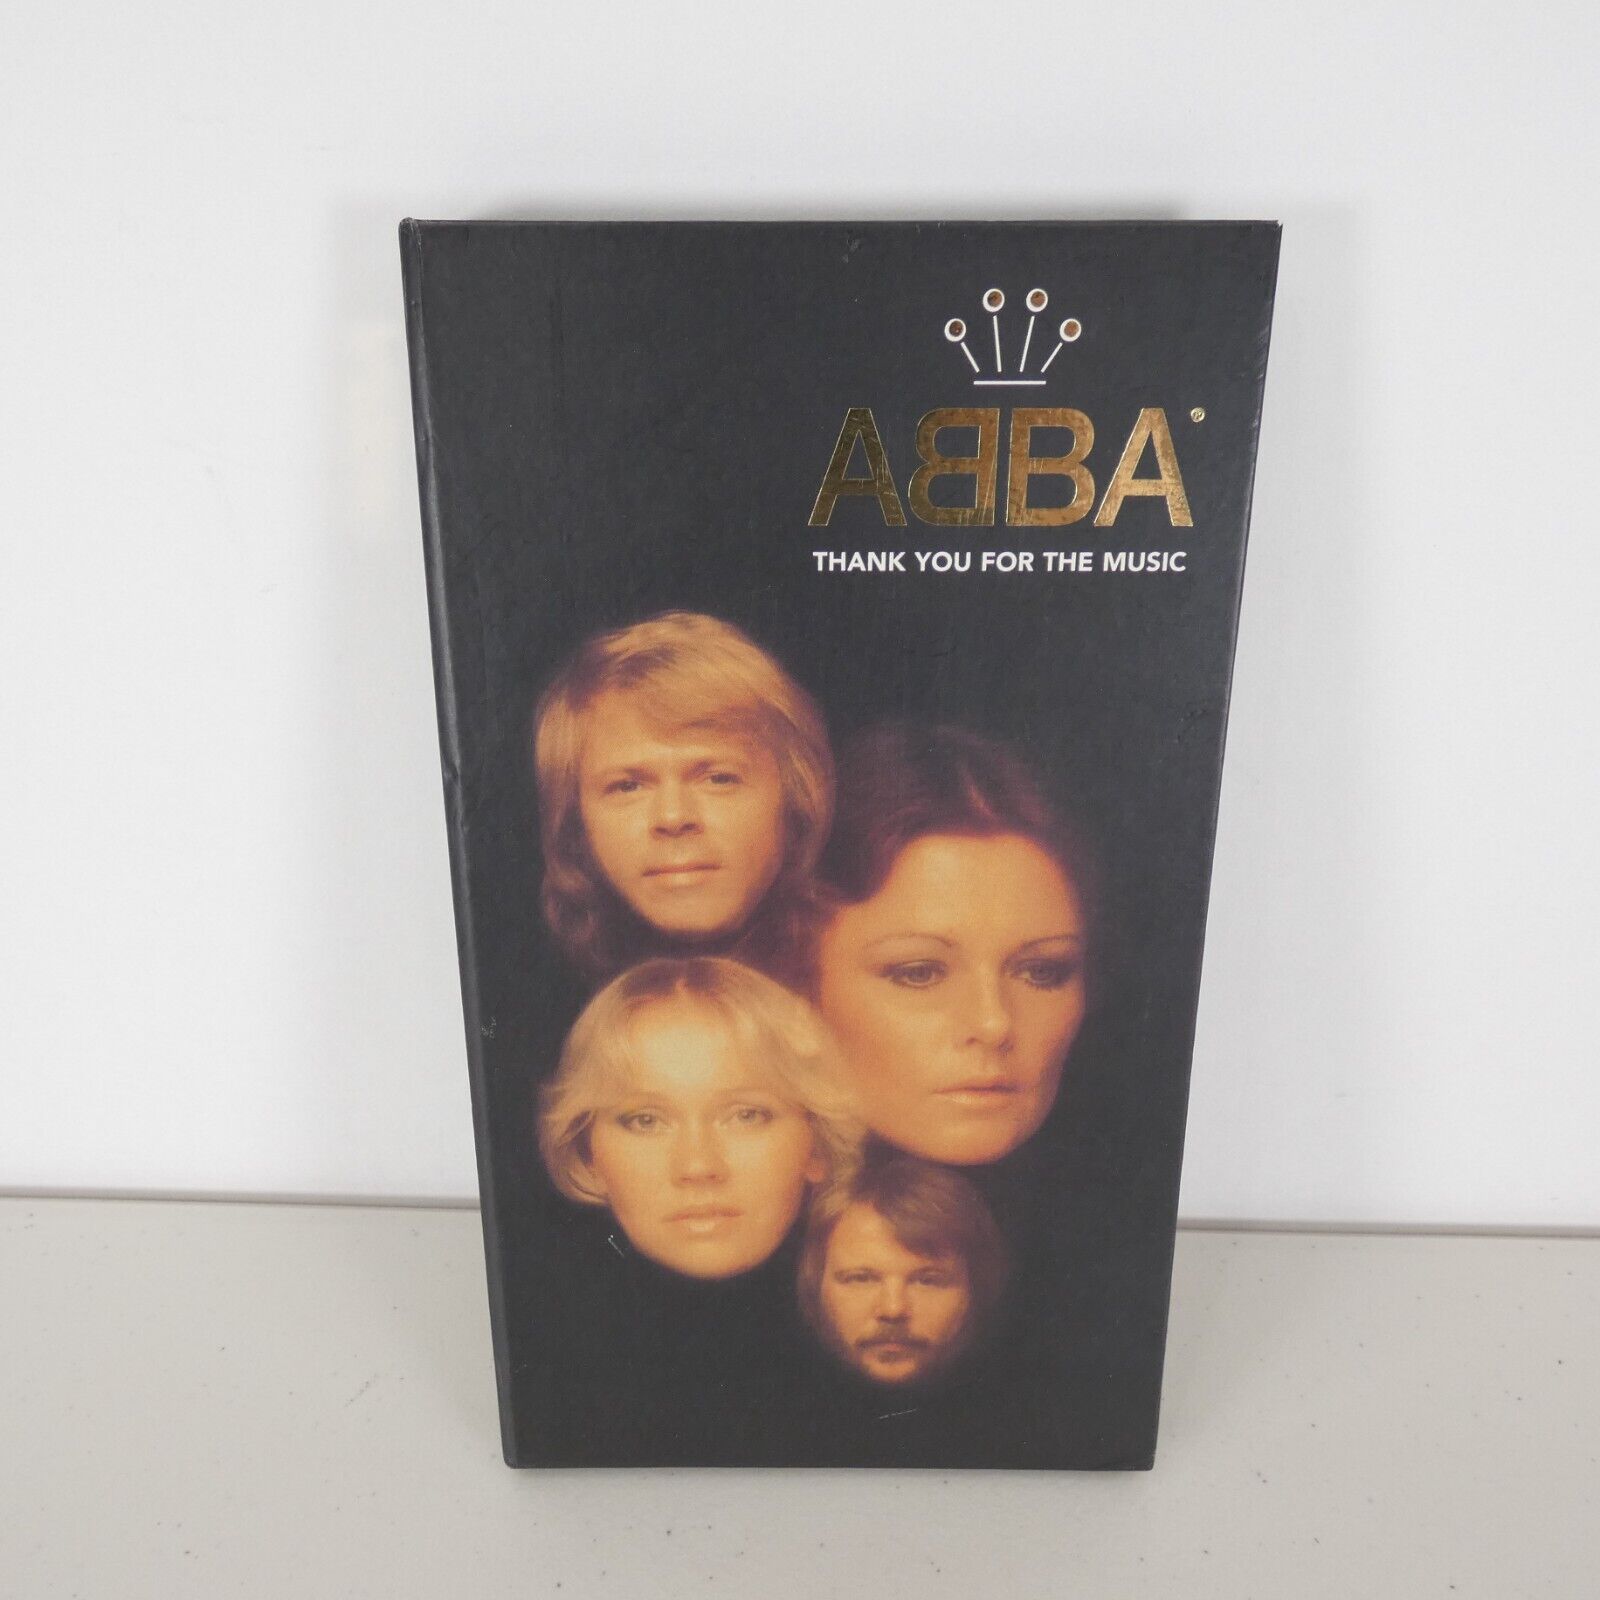 ABBA Thank You For The Music (4-Disc CD Box Set w/ Booklet)